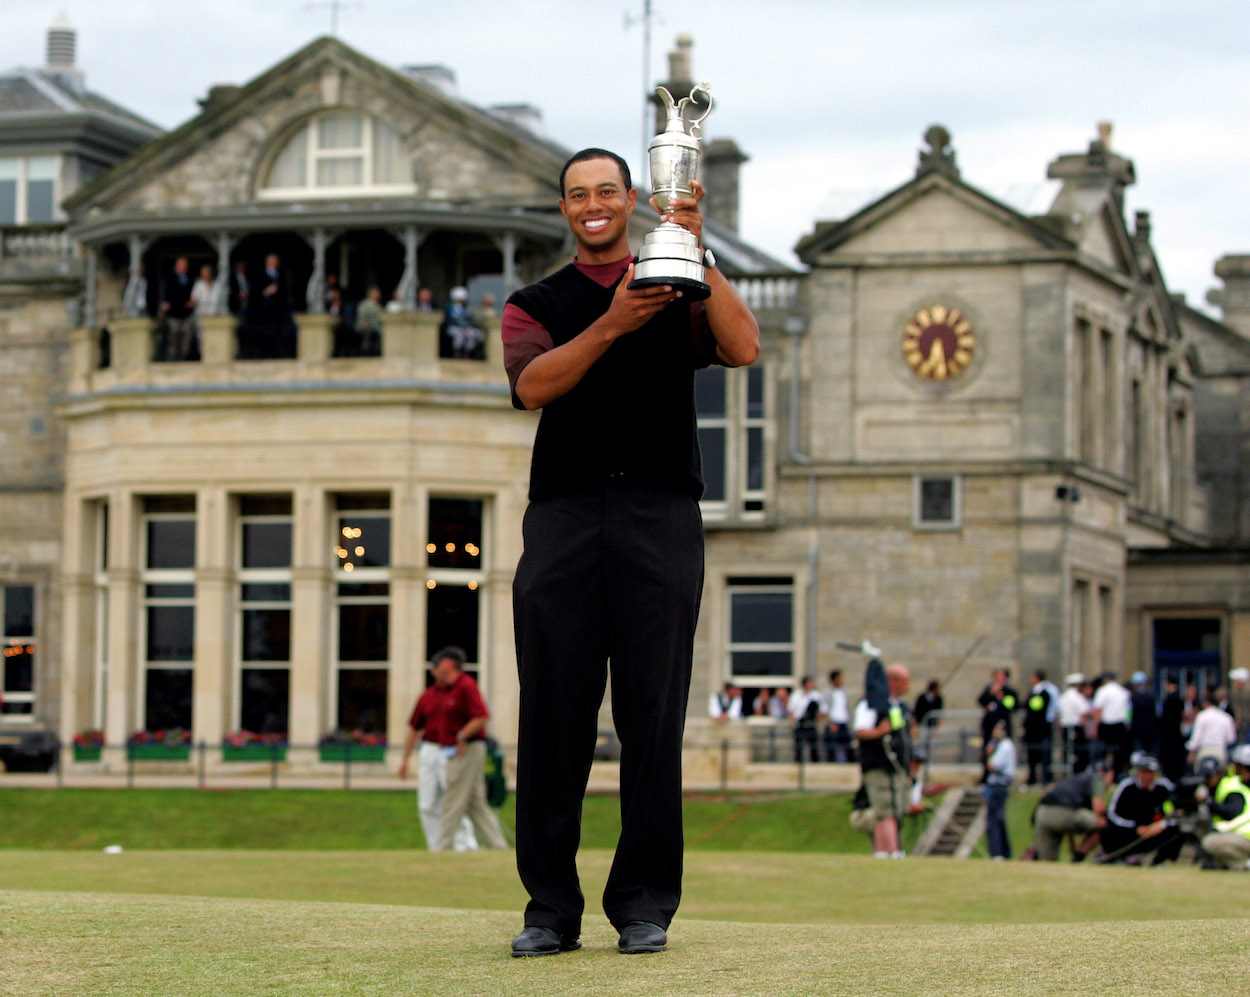 Tiger Woods won the 2005 Open Championship at St. Andrews.